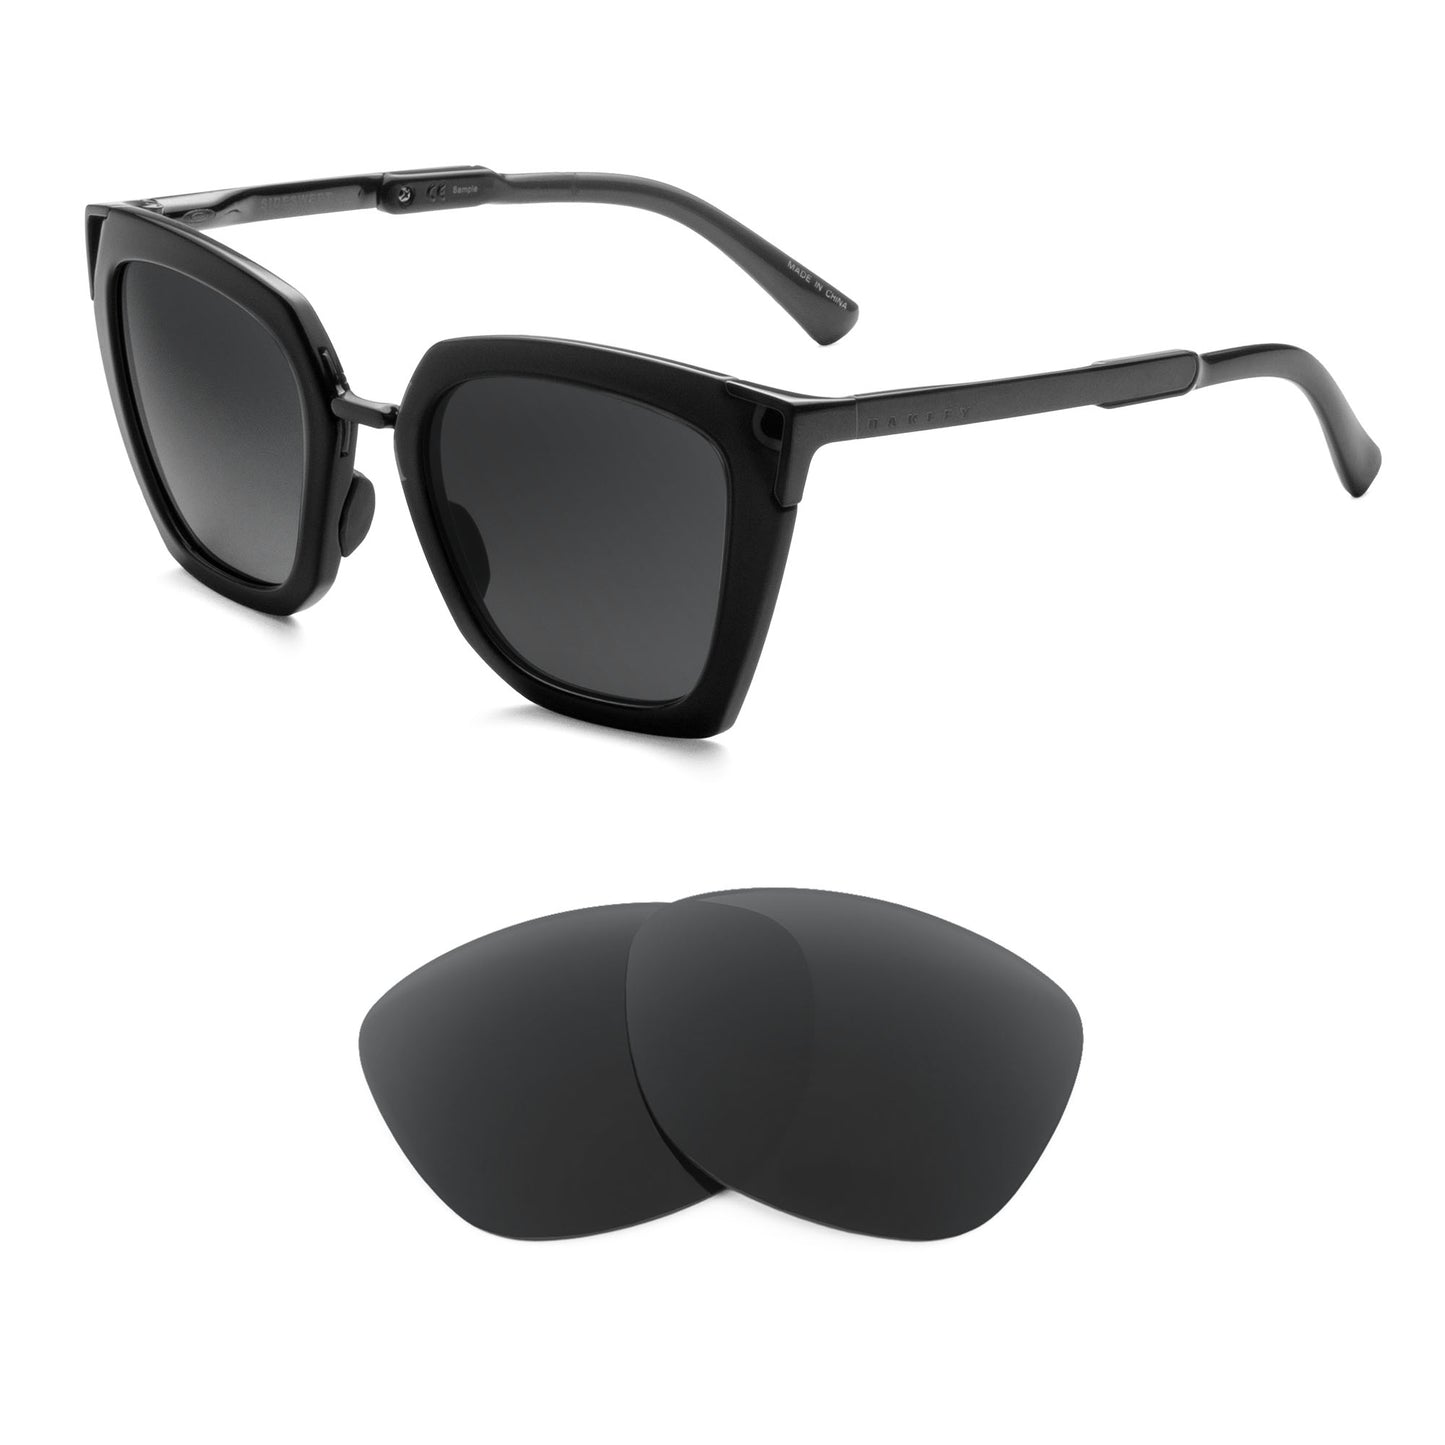 Oakley Sideswept sunglasses with replacement lenses